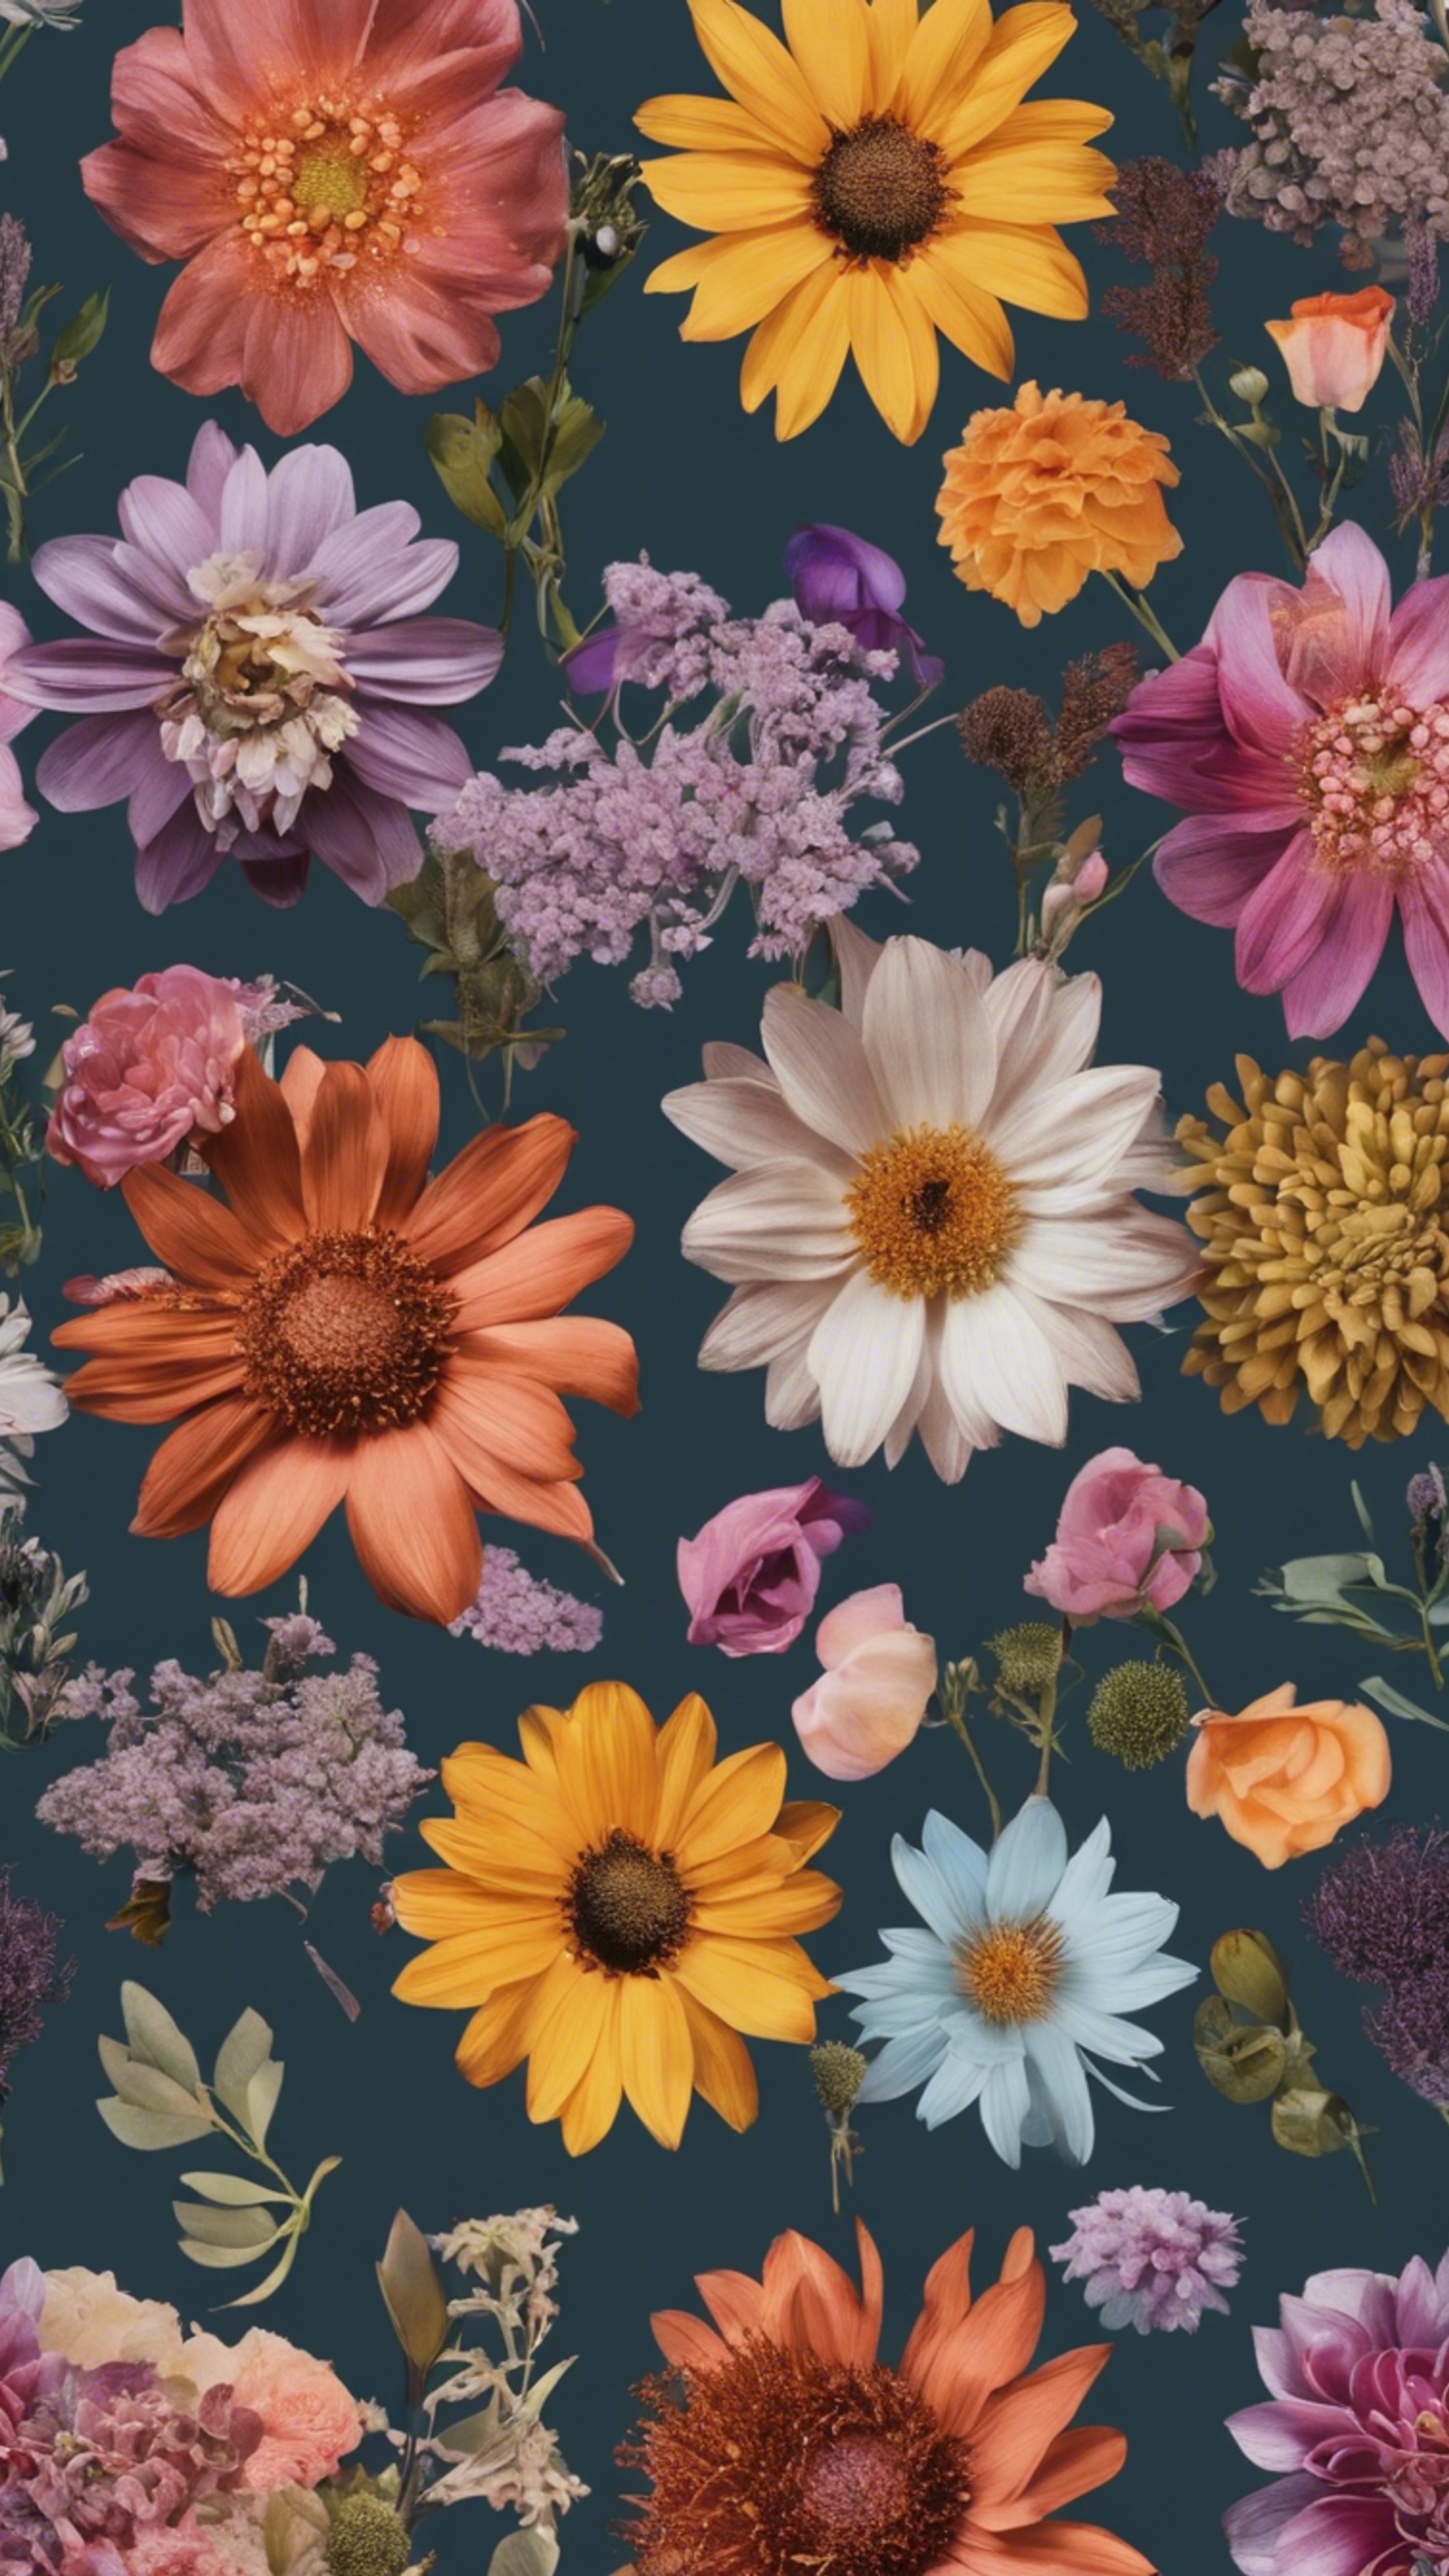 Multiple flowers of different types and colors, distinctively arranged in a bohemian floral design pattern. 牆紙[d475d4e8f3a0489d92d5]